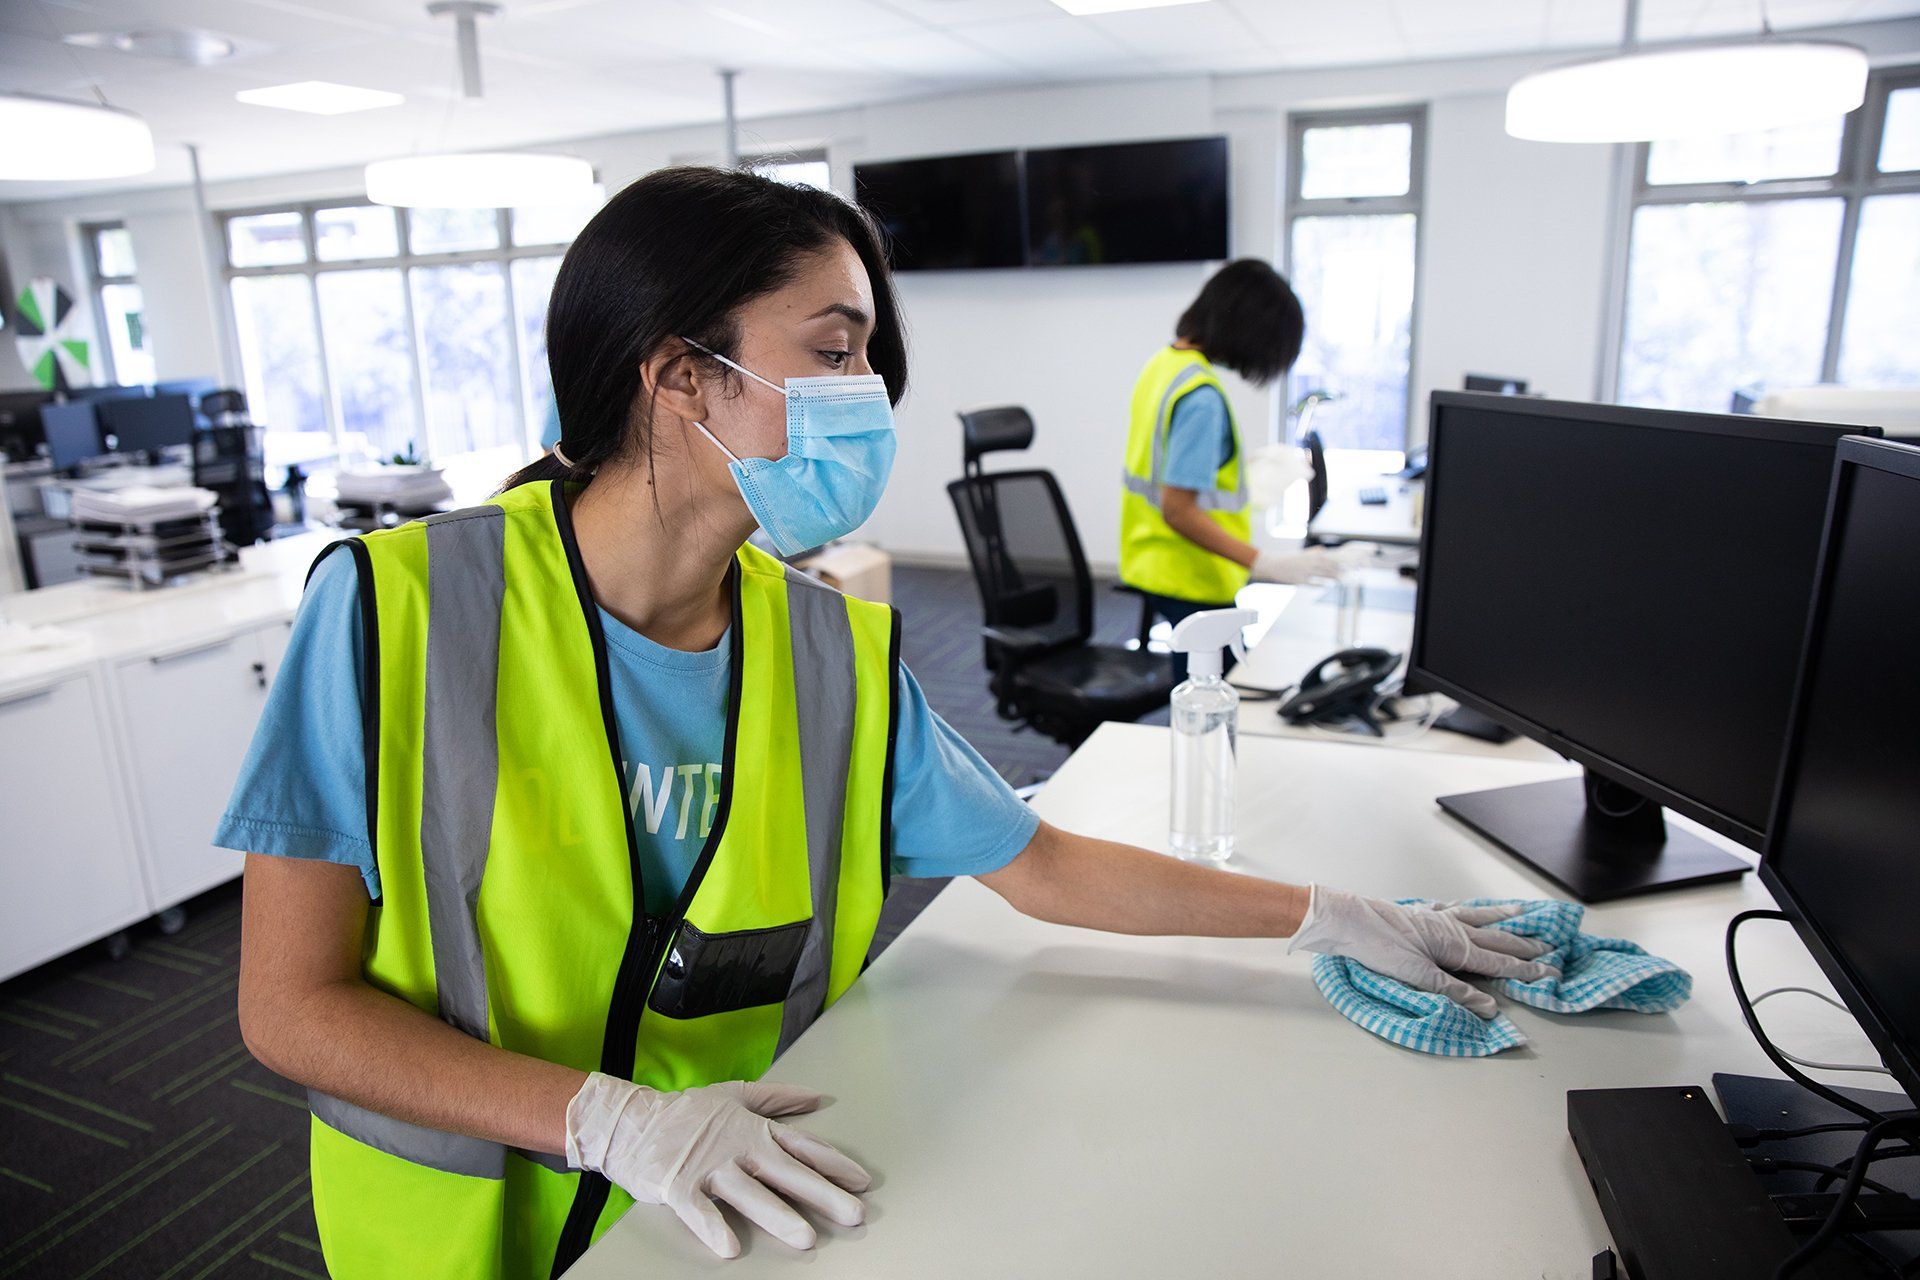 Office cleaning Exeter of a team wearing hi vis vests, gloves and face masks sanitizing an office using disinfectant. Hygiene in workplace during Coronavirus Covid 19 pandemic.